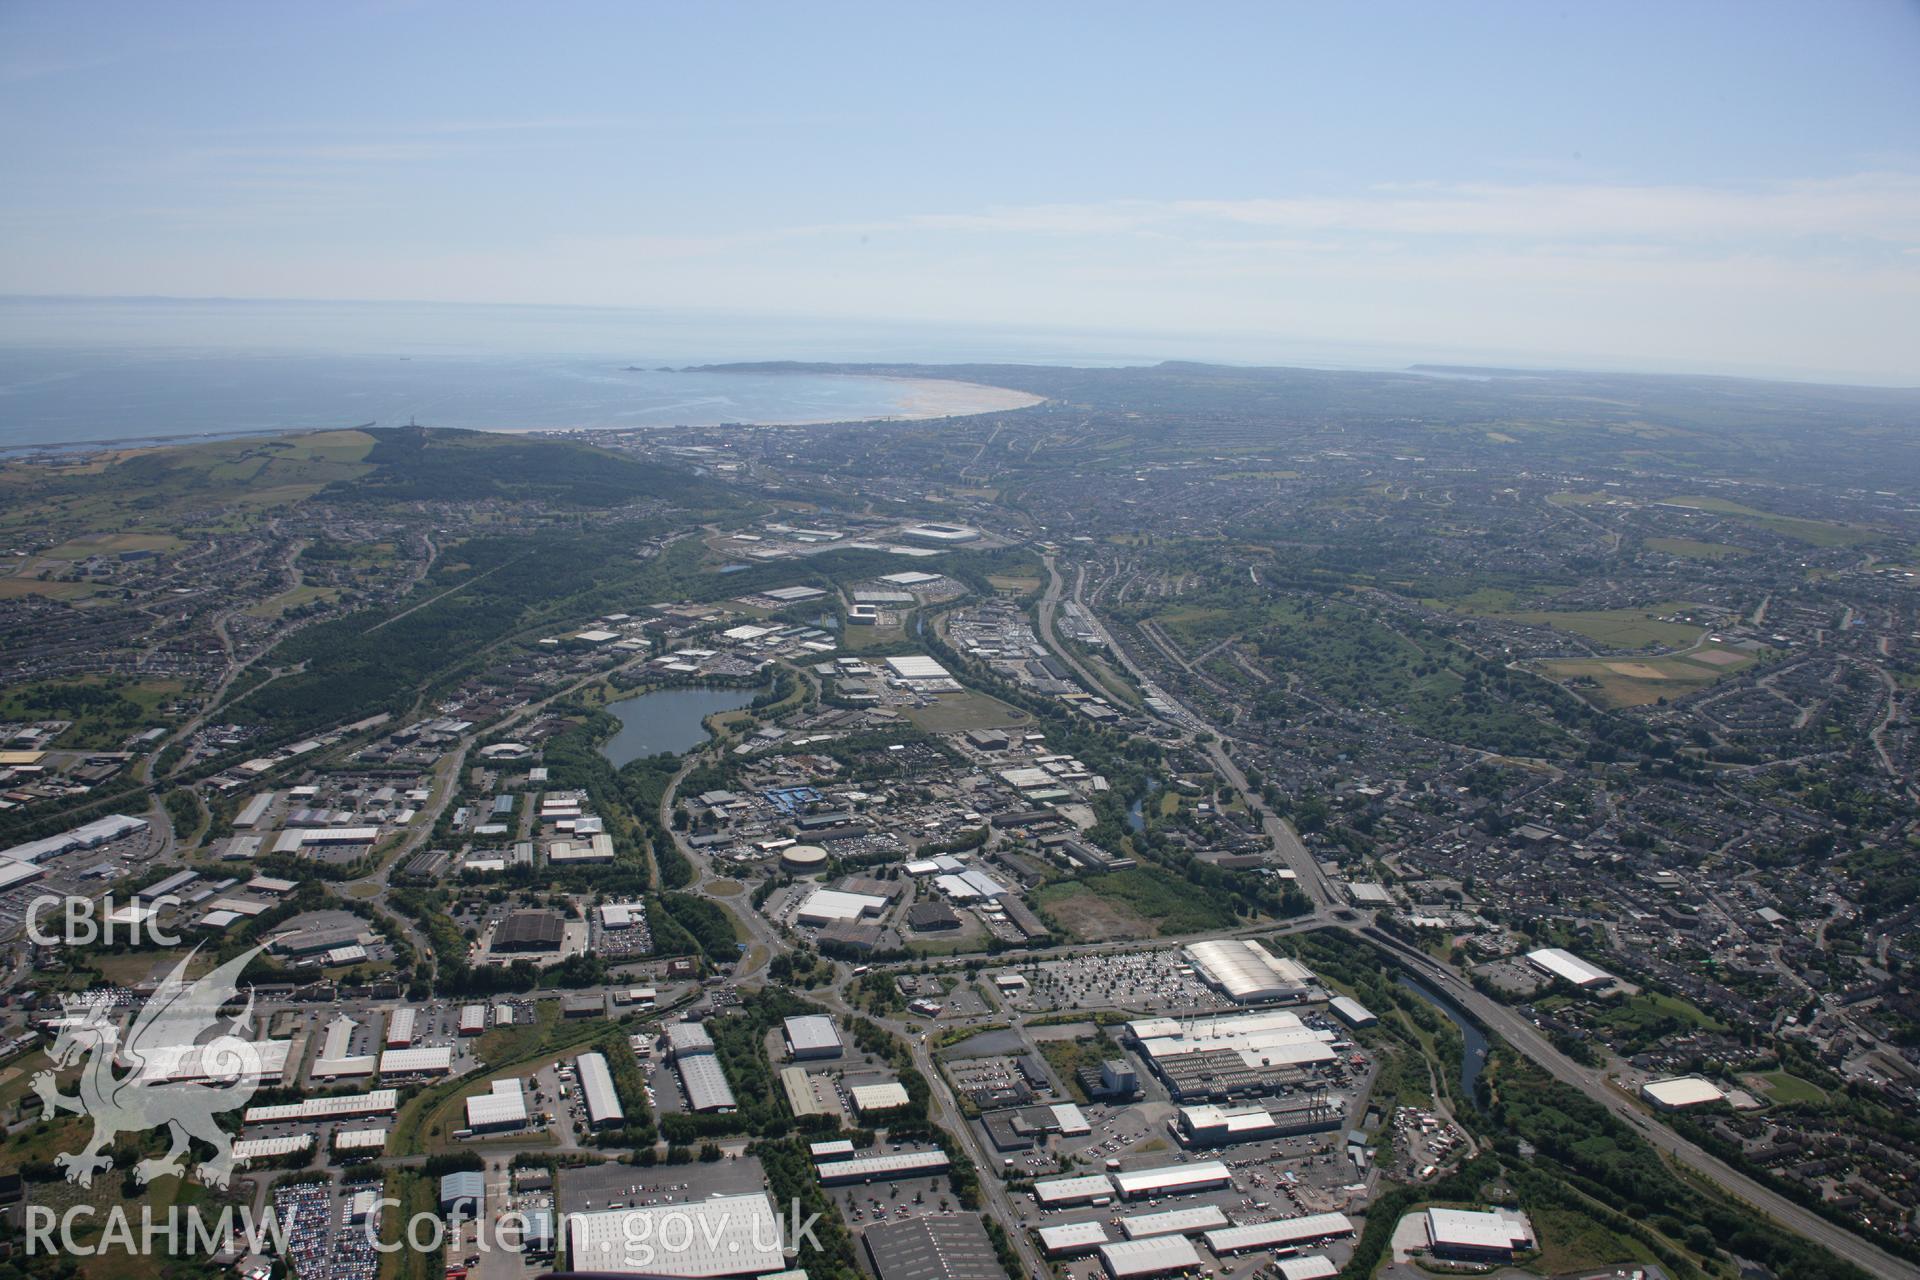 RCAHMW colour oblique aerial photograph of Swansea. Taken on 24 July 2006 by Toby Driver.